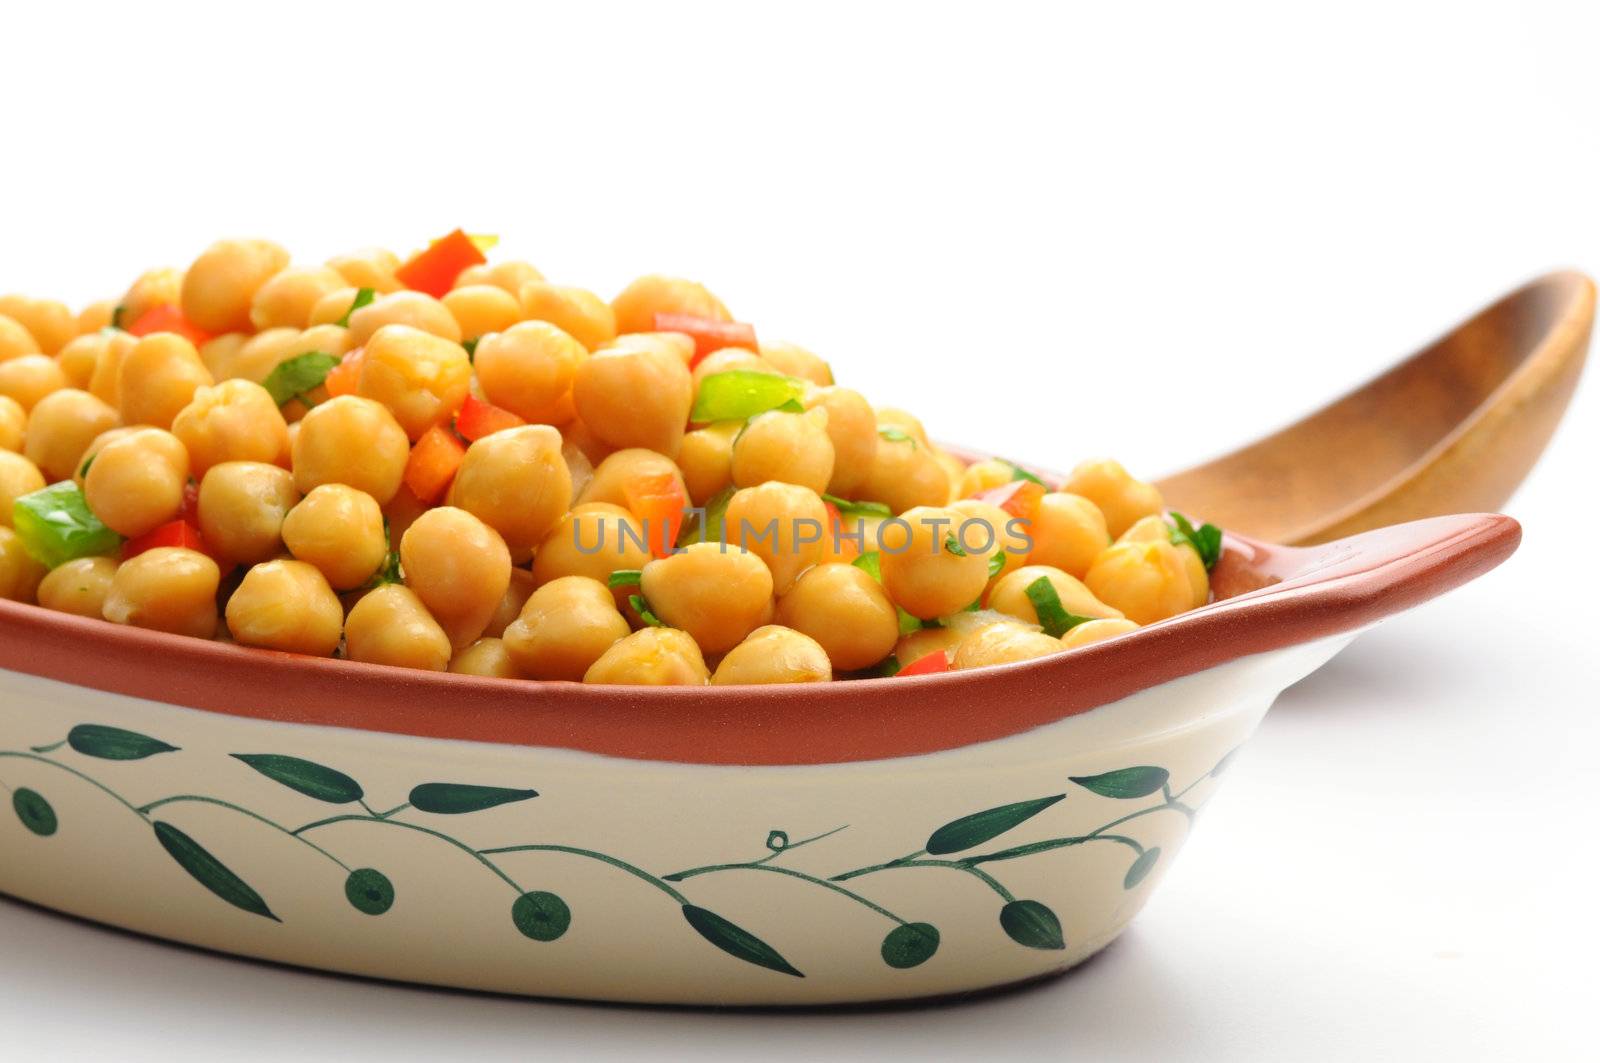 Healthy salad of chickpeas and colorful vegetables.